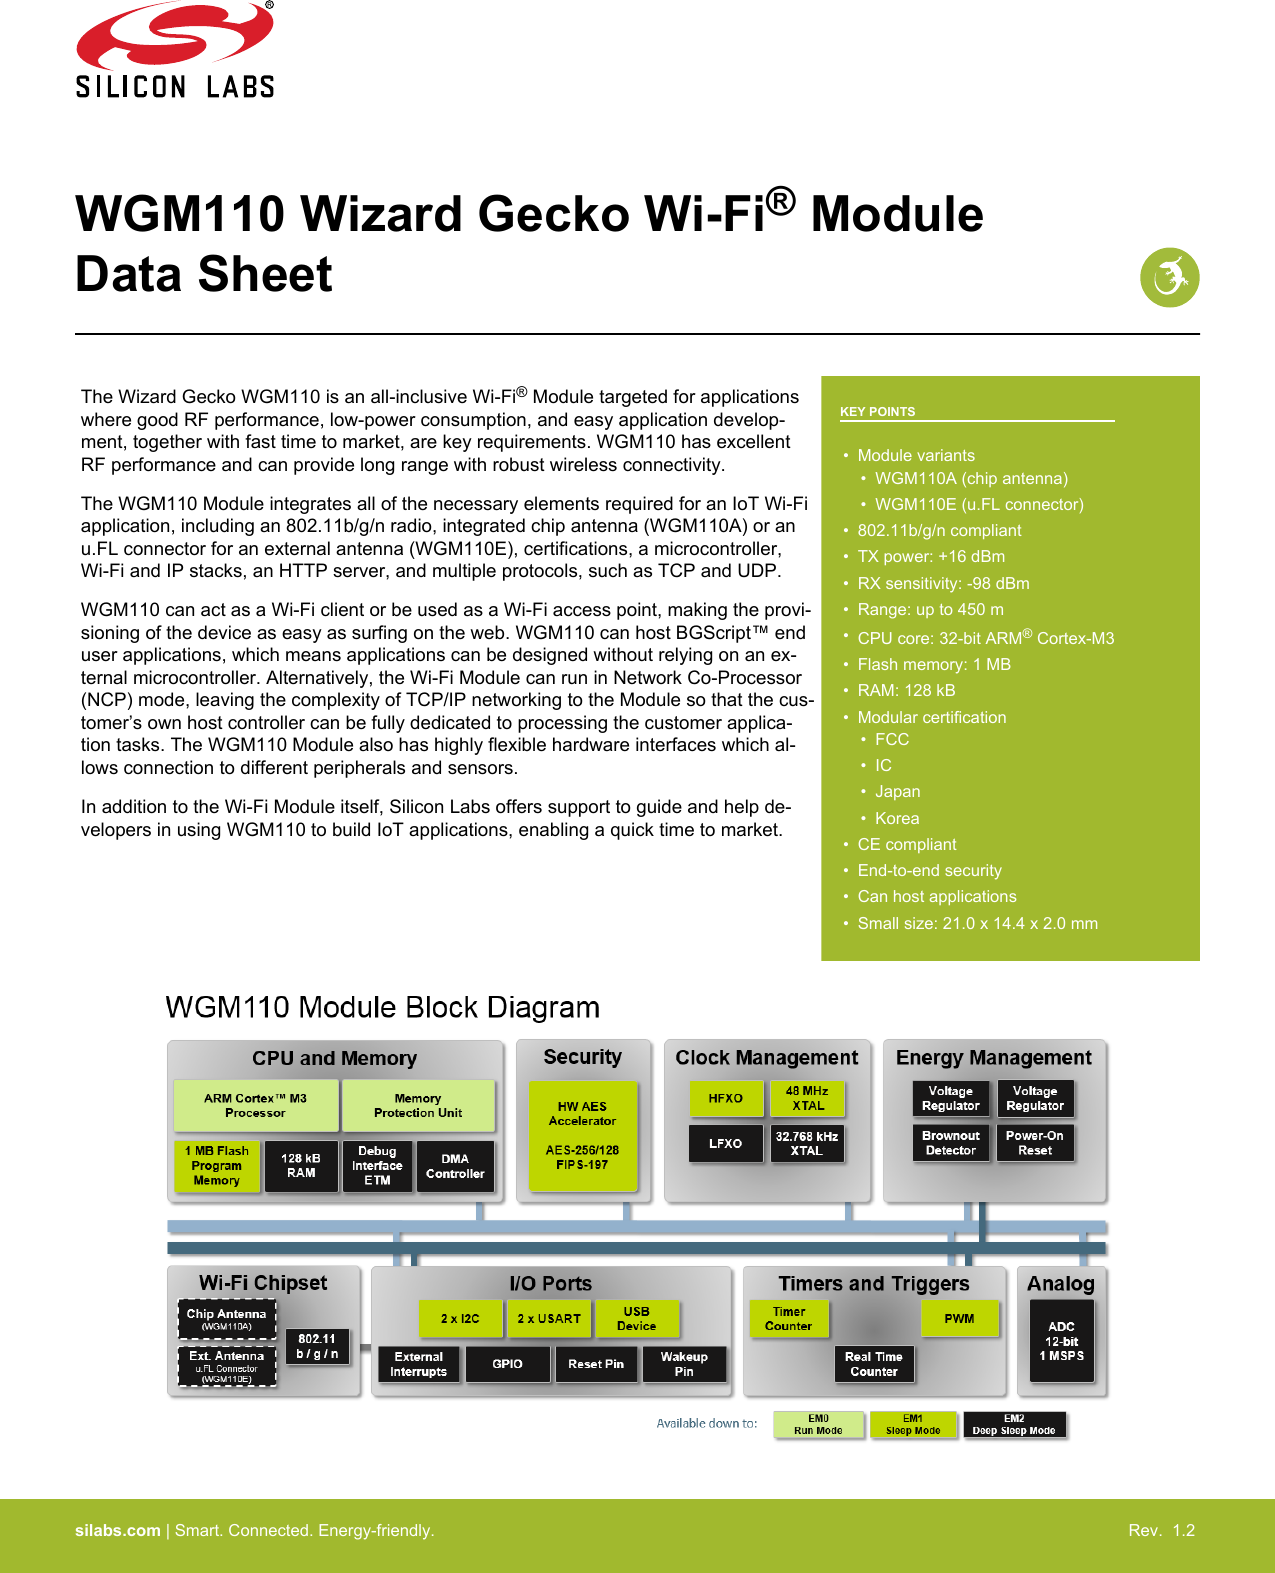 WGM110 Wizard Gecko Wi-Fi® ModuleData SheetThe Wizard Gecko WGM110 is an all-inclusive Wi-Fi® Module targeted for applicationswhere good RF performance, low-power consumption, and easy application develop-ment, together with fast time to market, are key requirements. WGM110 has excellentRF performance and can provide long range with robust wireless connectivity.The WGM110 Module integrates all of the necessary elements required for an IoT Wi-Fiapplication, including an 802.11b/g/n radio, integrated chip antenna (WGM110A) or anu.FL connector for an external antenna (WGM110E), certifications, a microcontroller,Wi-Fi and IP stacks, an HTTP server, and multiple protocols, such as TCP and UDP.WGM110 can act as a Wi-Fi client or be used as a Wi-Fi access point, making the provi-sioning of the device as easy as surfing on the web. WGM110 can host BGScript™ enduser applications, which means applications can be designed without relying on an ex-ternal microcontroller. Alternatively, the Wi-Fi Module can run in Network Co-Processor(NCP) mode, leaving the complexity of TCP/IP networking to the Module so that the cus-tomer’s own host controller can be fully dedicated to processing the customer applica-tion tasks. The WGM110 Module also has highly flexible hardware interfaces which al-lows connection to different peripherals and sensors.In addition to the Wi-Fi Module itself, Silicon Labs offers support to guide and help de-velopers in using WGM110 to build IoT applications, enabling a quick time to market.KEY POINTS• Module variants• WGM110A (chip antenna)• WGM110E (u.FL connector)• 802.11b/g/n compliant• TX power: +16 dBm• RX sensitivity: -98 dBm• Range: up to 450 m•CPU core: 32-bit ARM® Cortex-M3• Flash memory: 1 MB• RAM: 128 kB• Modular certification• FCC• IC• Japan• Korea• CE compliant• End-to-end security• Can host applications• Small size: 21.0 x 14.4 x 2.0 mmsilabs.com | Smart. Connected. Energy-friendly. Rev.  1.2 